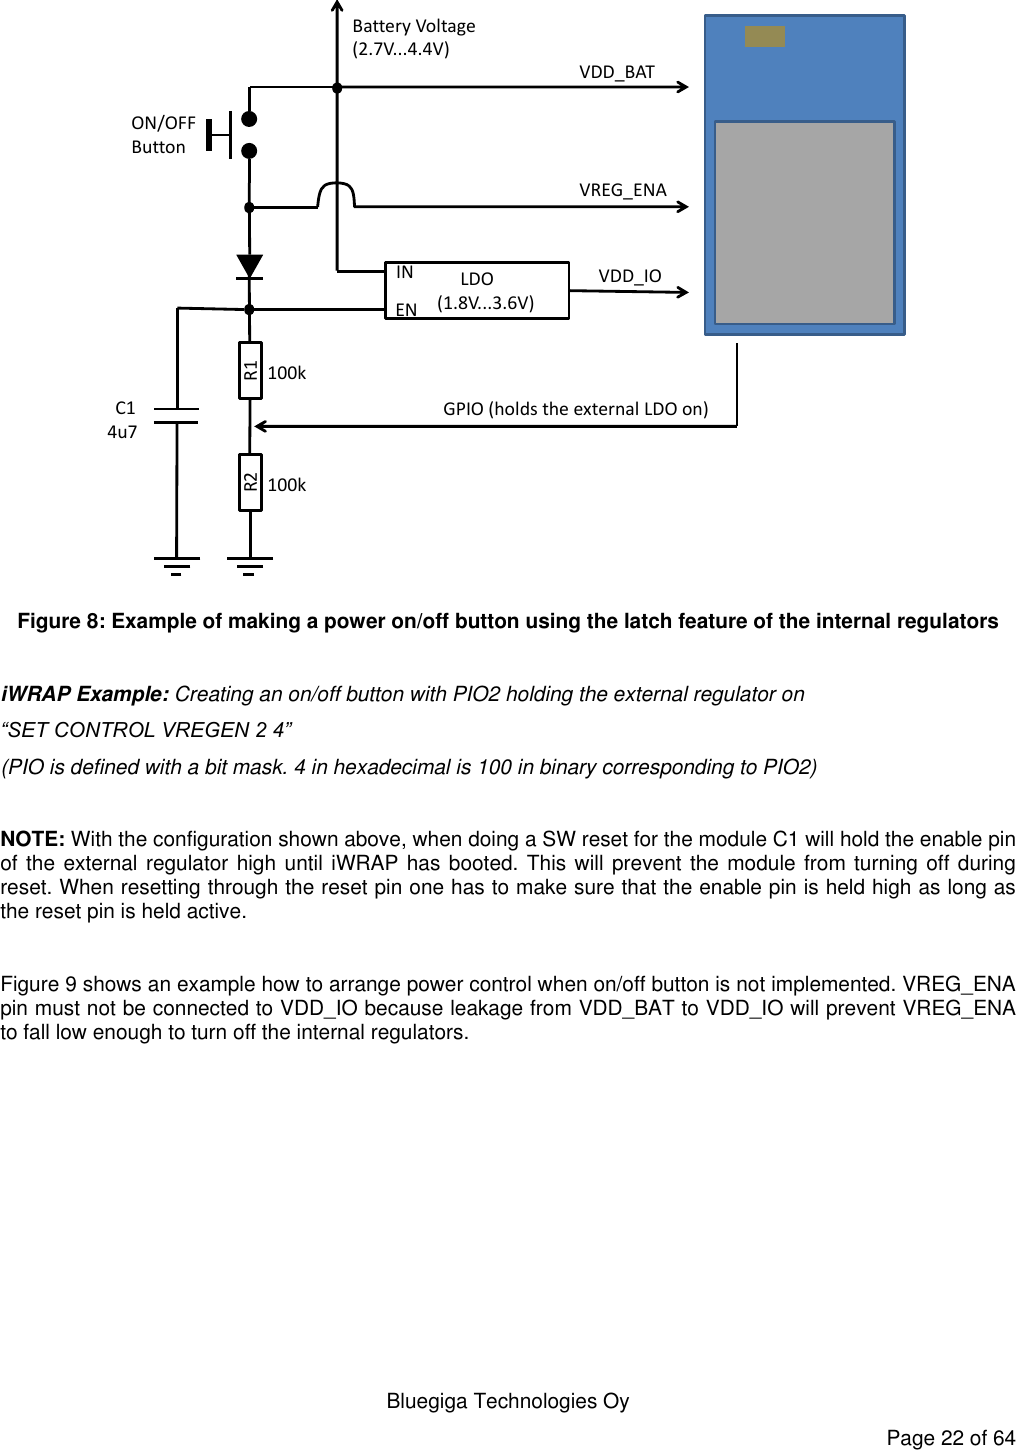   Bluegiga Technologies Oy Page 22 of 64 R1R2LDO (1.8V...3.6V)ENINVDD_BATVREG_ENAVDD_IOGPIO (holds the external LDO on)ON/OFF ButtonBattery Voltage(2.7V...4.4V)C1100k100k4u7 Figure 8: Example of making a power on/off button using the latch feature of the internal regulators  iWRAP Example: Creating an on/off button with PIO2 holding the external regulator on  “SET CONTROL VREGEN 2 4”  (PIO is defined with a bit mask. 4 in hexadecimal is 100 in binary corresponding to PIO2)  NOTE: With the configuration shown above, when doing a SW reset for the module C1 will hold the enable pin of the external regulator high until iWRAP has booted. This will prevent the module from turning off during reset. When resetting through the reset pin one has to make sure that the enable pin is held high as long as the reset pin is held active.  Figure 9 shows an example how to arrange power control when on/off button is not implemented. VREG_ENA pin must not be connected to VDD_IO because leakage from VDD_BAT to VDD_IO will prevent VREG_ENA to fall low enough to turn off the internal regulators. 